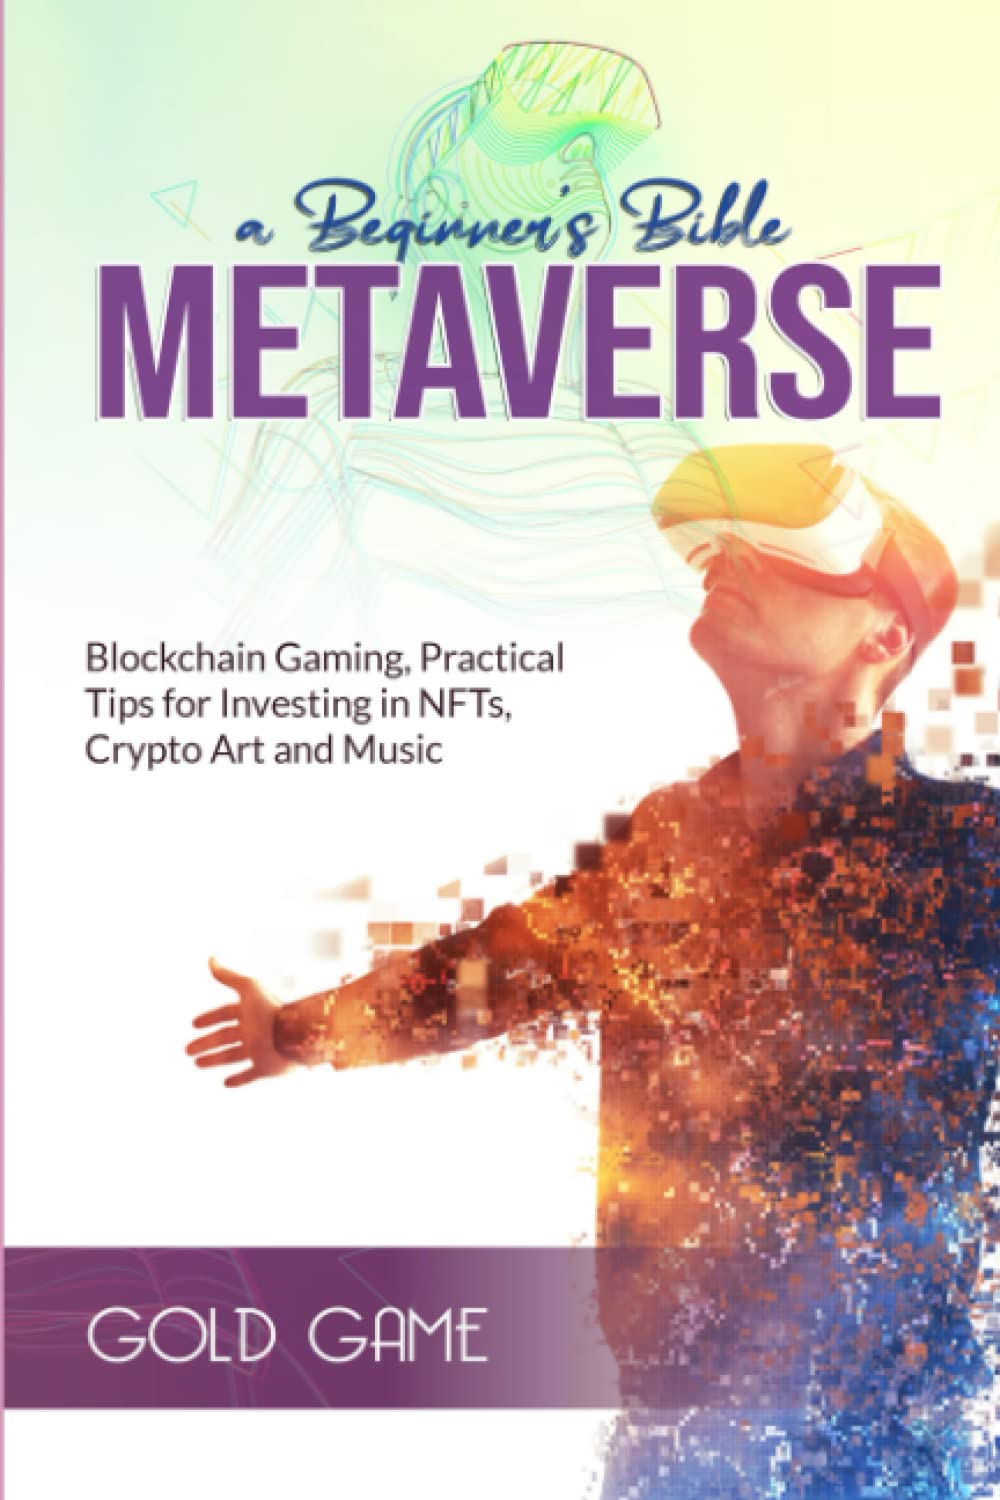 METAVERSE a Beginner’s Bible: Blockchain Gaming, Practical Tips for Investing in NFTs, Crypto Art and Music